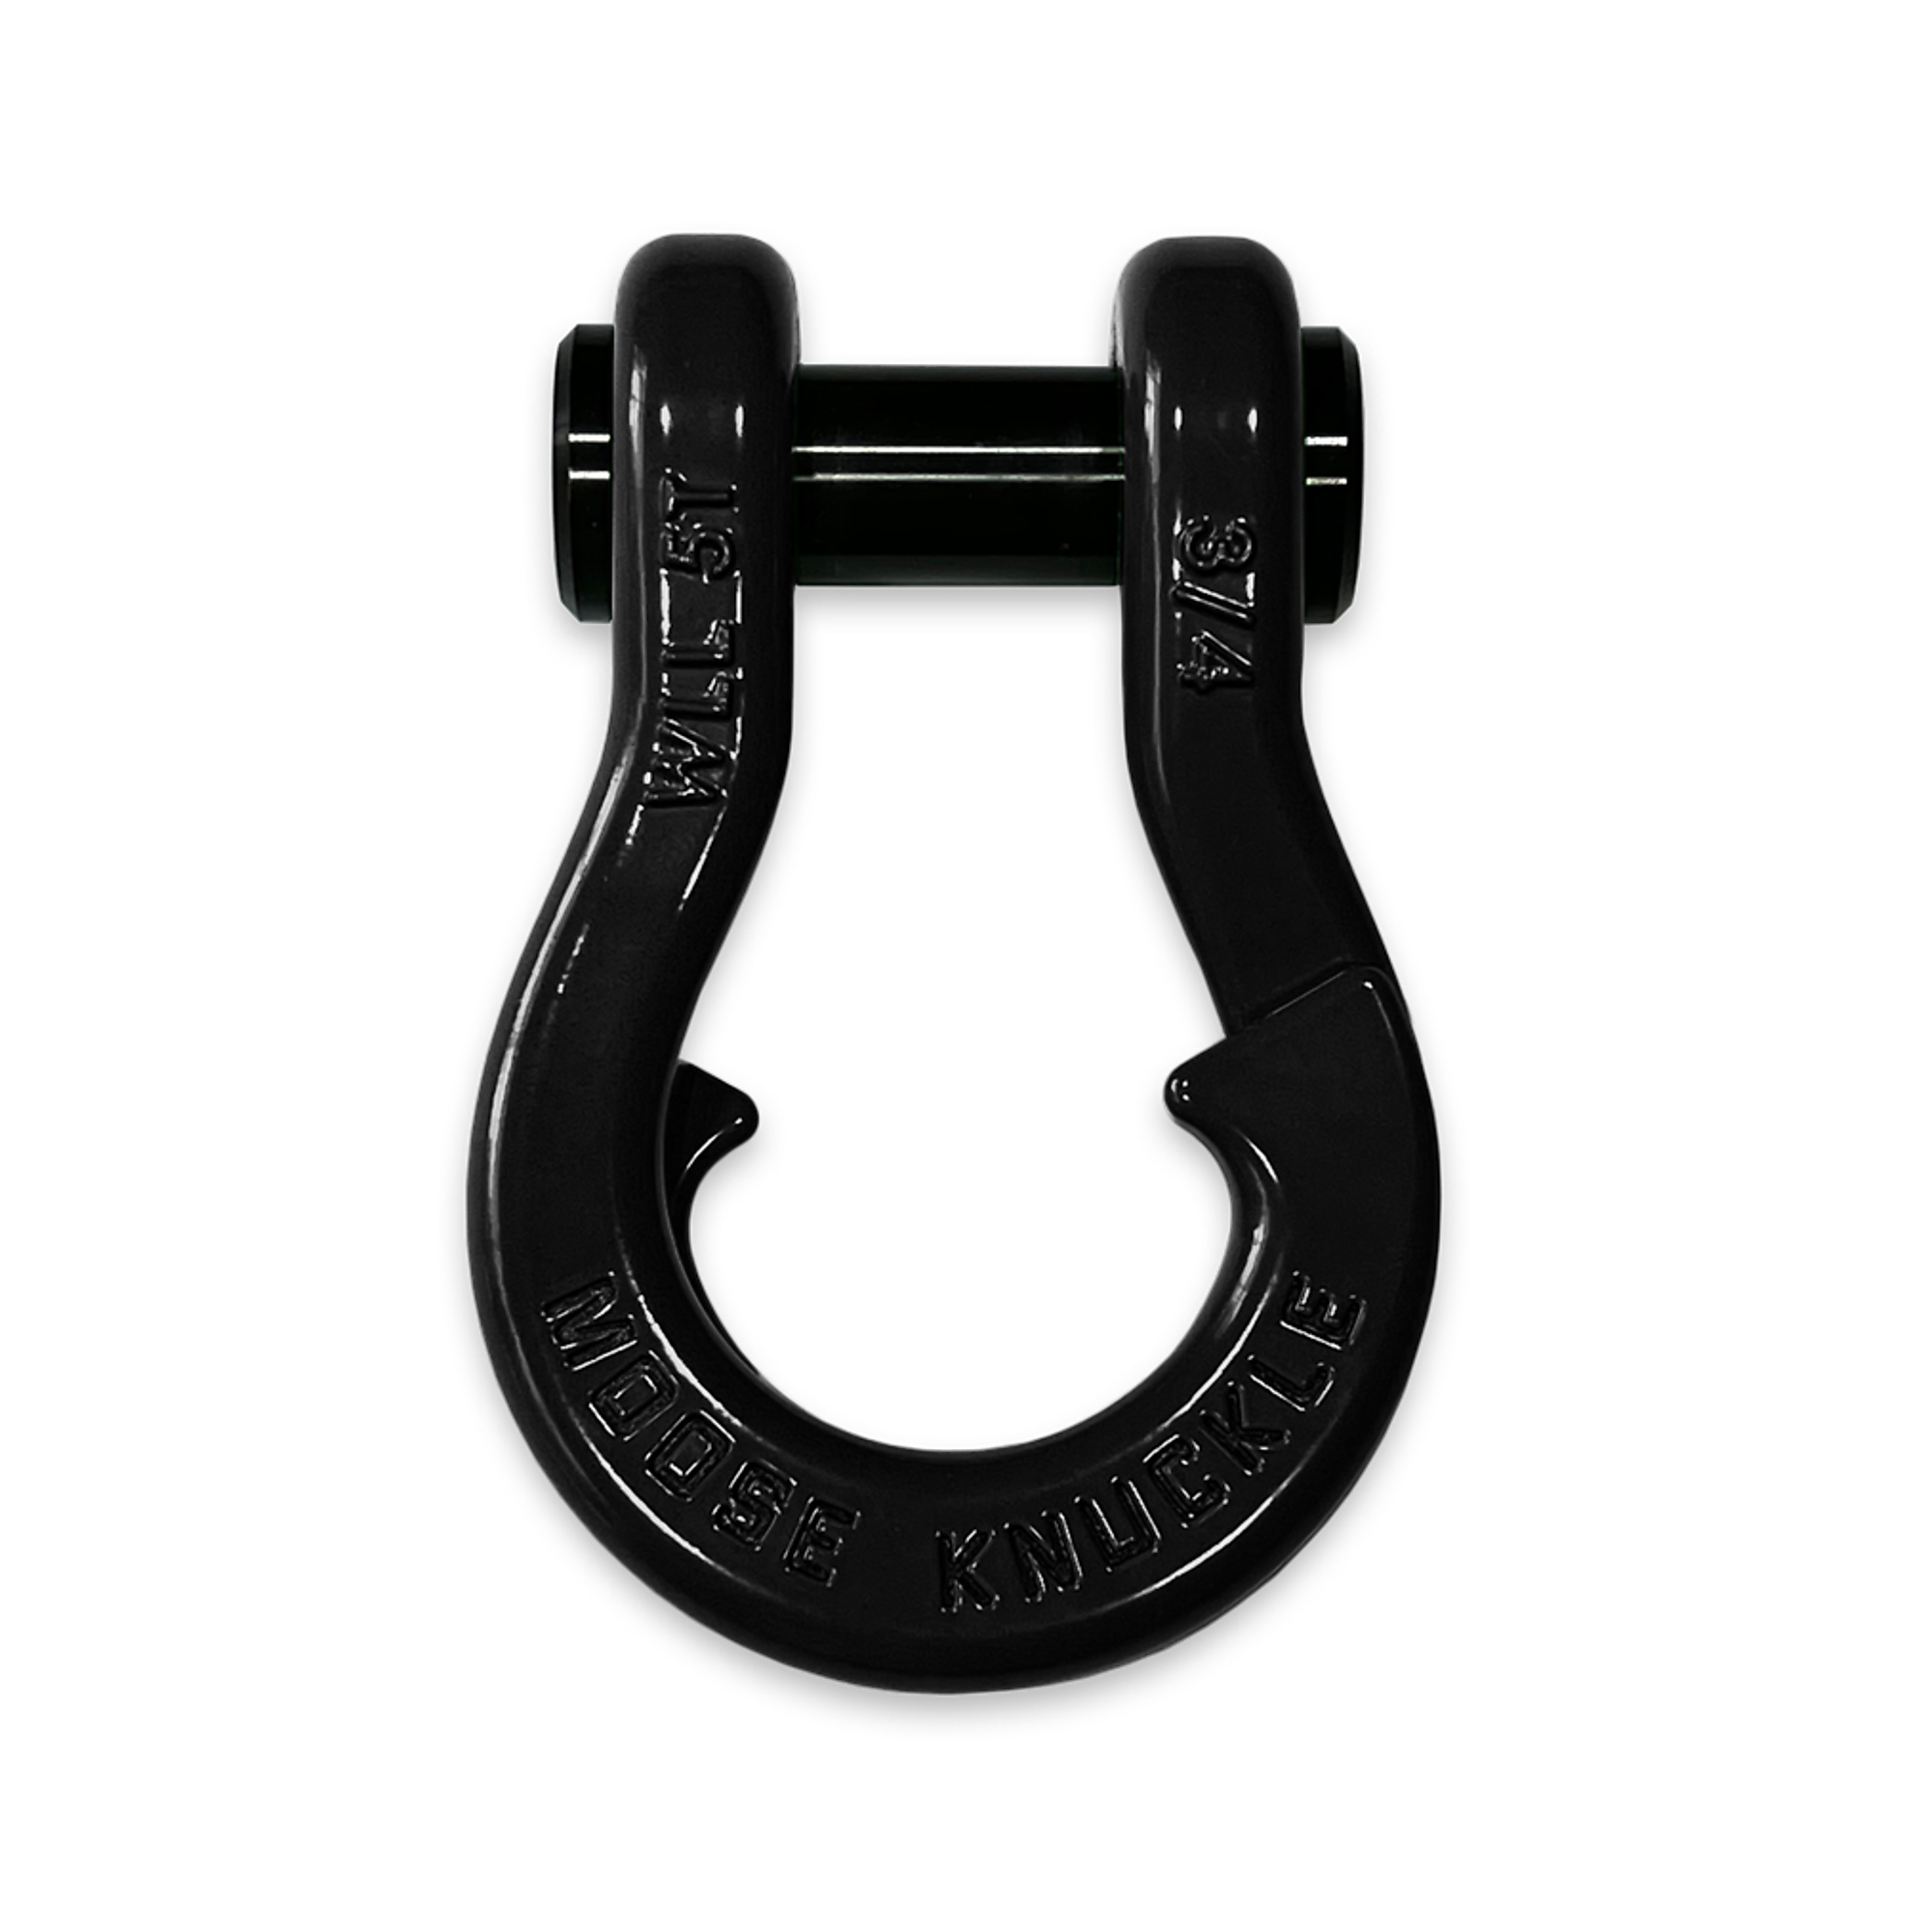 Moose Knuckle Offroad, Black Hole 3/4Inch Recovery Towing Split Shackle, Working Load Limit 10000 lb, Model FN000020-001